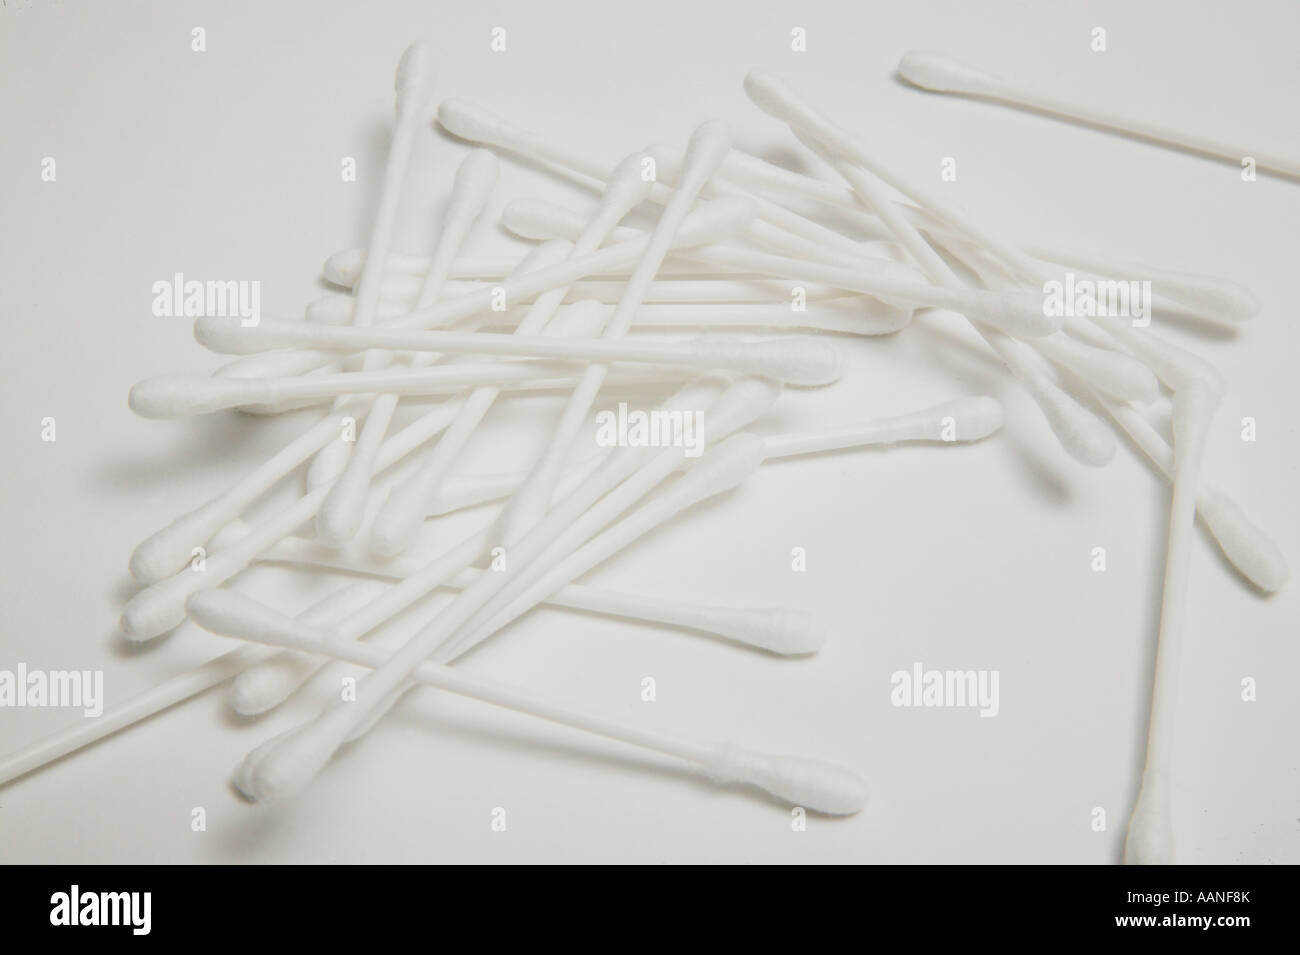 Cotton buds/Q tips on a white back ground Stock Photo